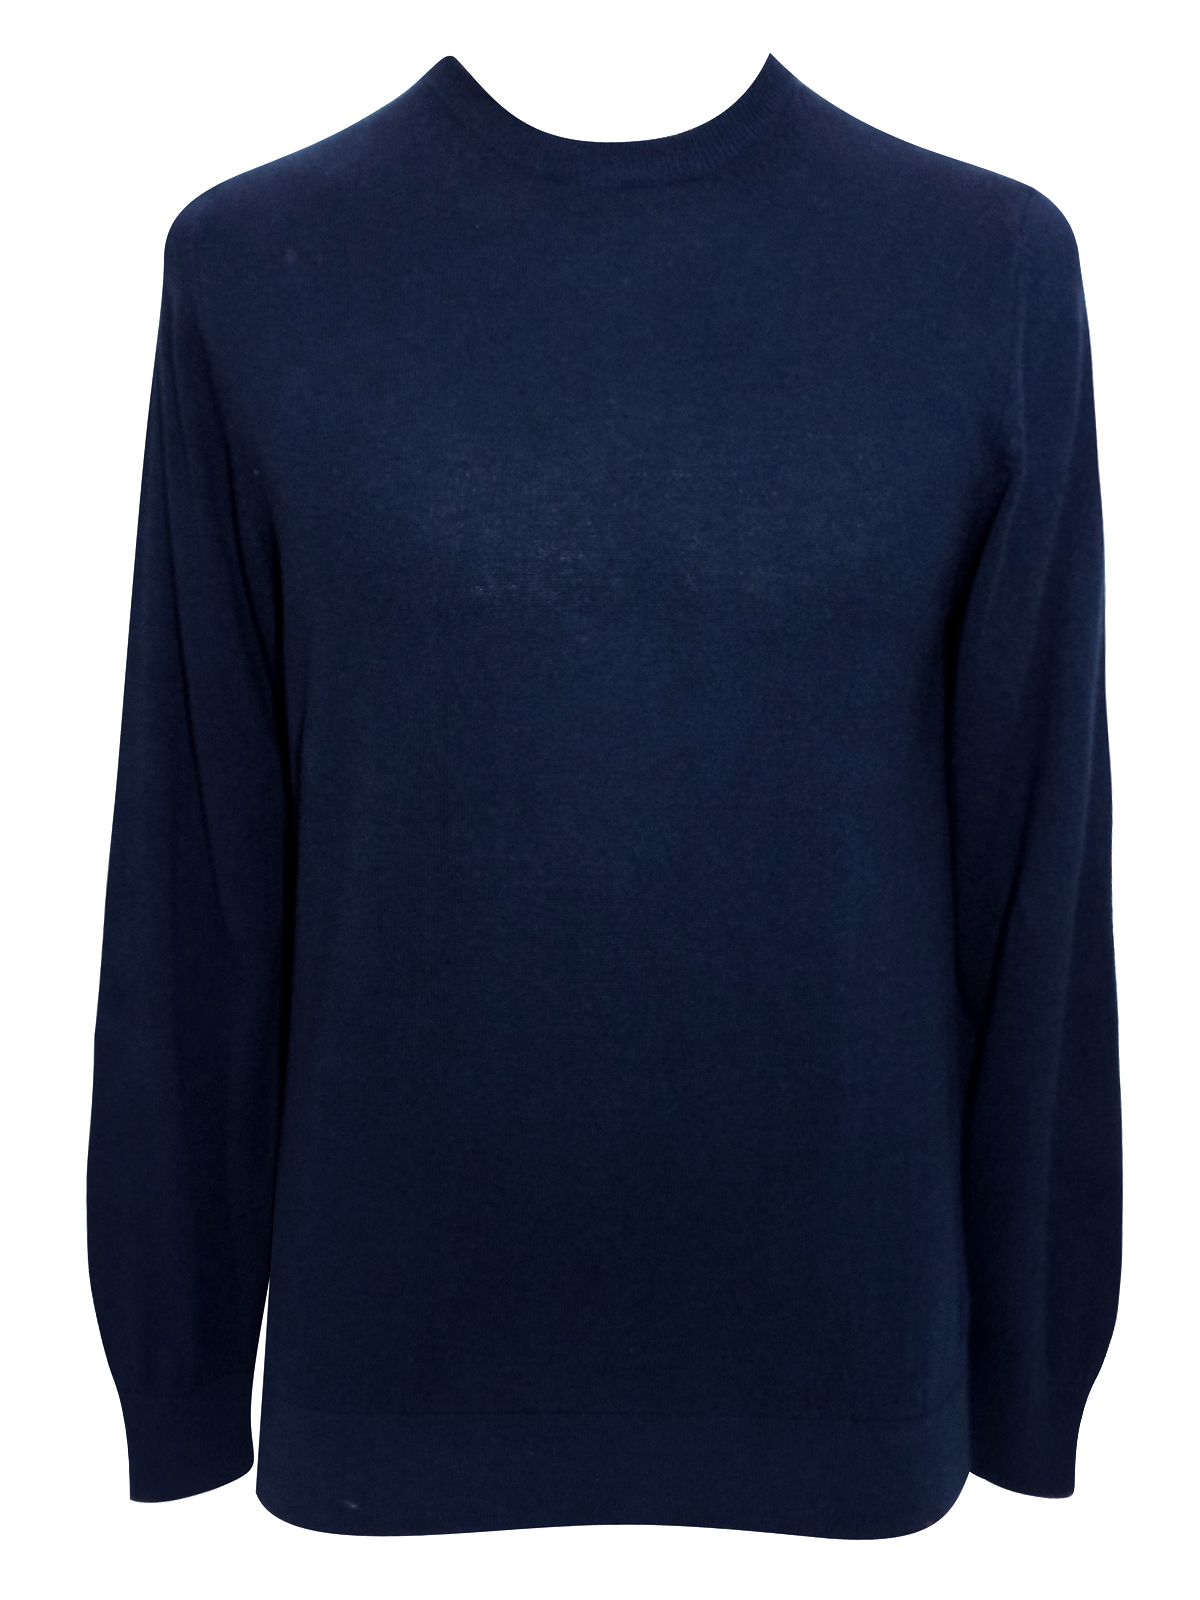 Marks and Spencer - - M&5 Mens NAVY Cotton Blend Jumper - Size Small to ...